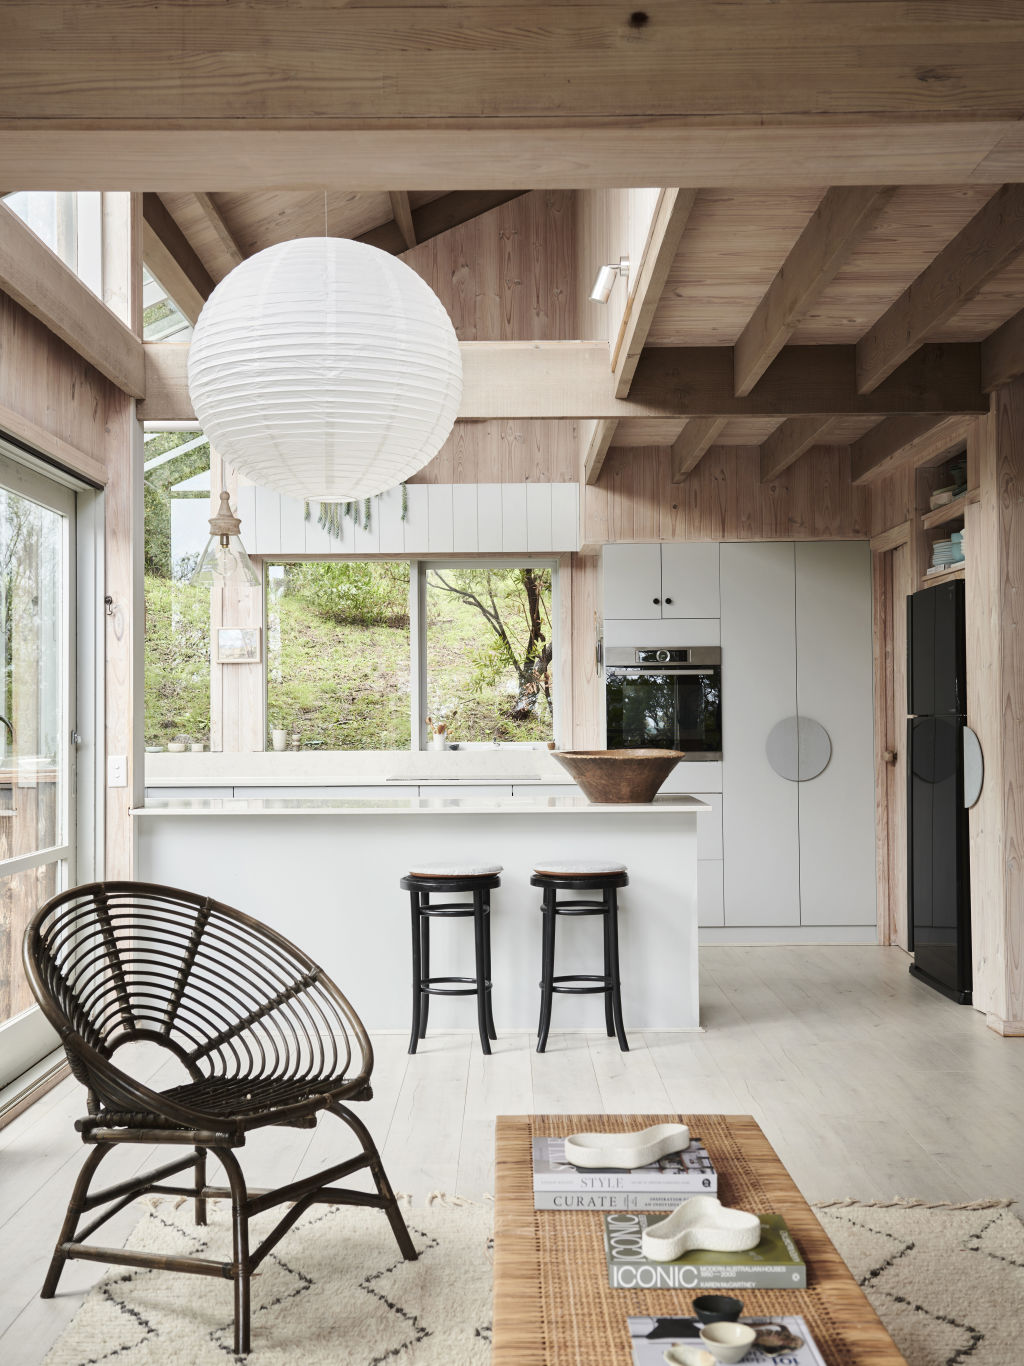 The minimal decorations in the home were inspired by its surrounds. Photo: Eve Wilson